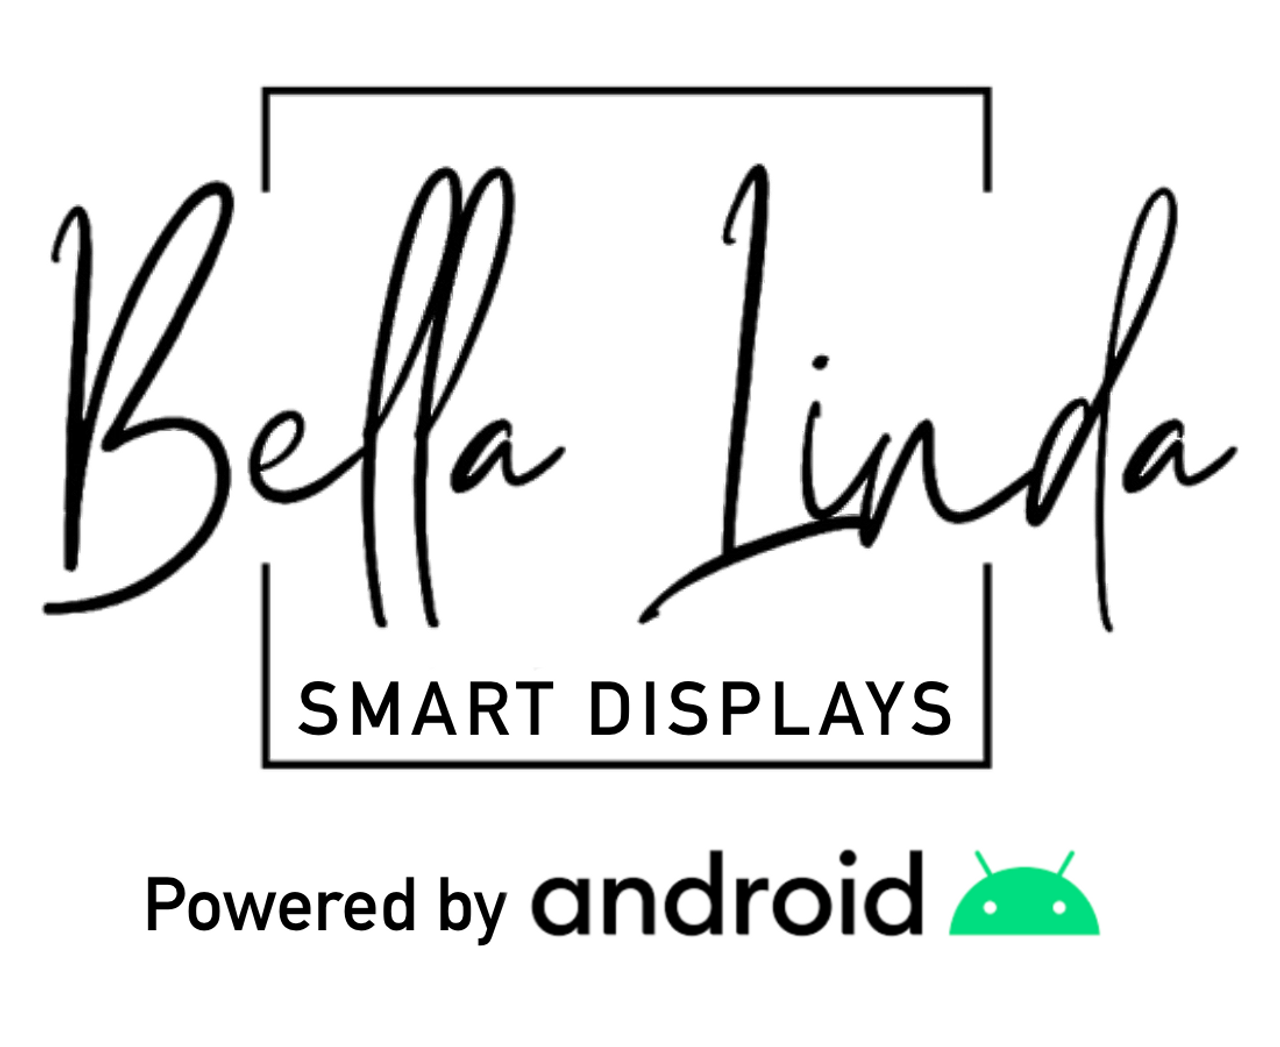 Android Powered Displays